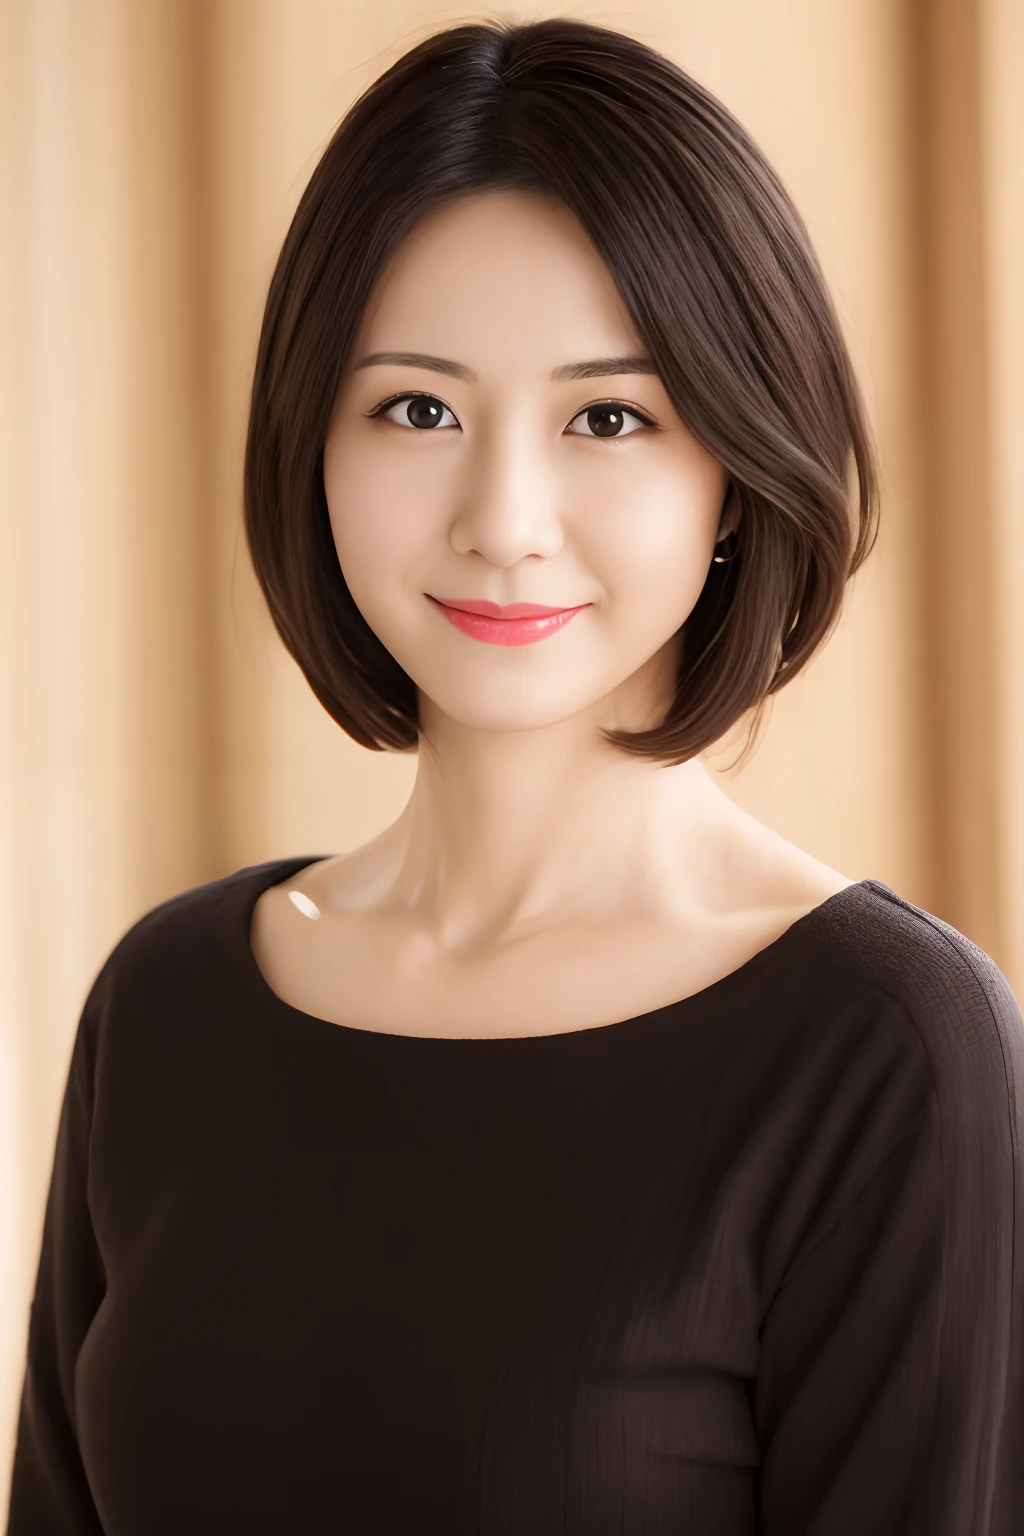 portlate、8K、hightquality、Realistic photo images、39 years old、A Japanese Lady、Neat and clean wife、house wife、Reproduce natural and realistic eyes、Japan Person Stand、、Beautiful black hair、Shorthair、light make-up、octan render、beautiful  lighting、Composition of the golden ratio、A smile、Everyday clothes、dressed casually、Natural background、blured background、4K、high-level image quality、Realistic photo images、A Japanese Lady、37 years old、Pure Japan human features、Lovely wife、The upper part of the body、middlebreasts、Light makeup、Suppin、Neat and clean beauty、A MILF、Sober clothing、greys、Beige、bloo、Casual attire、A slight smil、A dark-haired、Small black eyes、Background bokeh